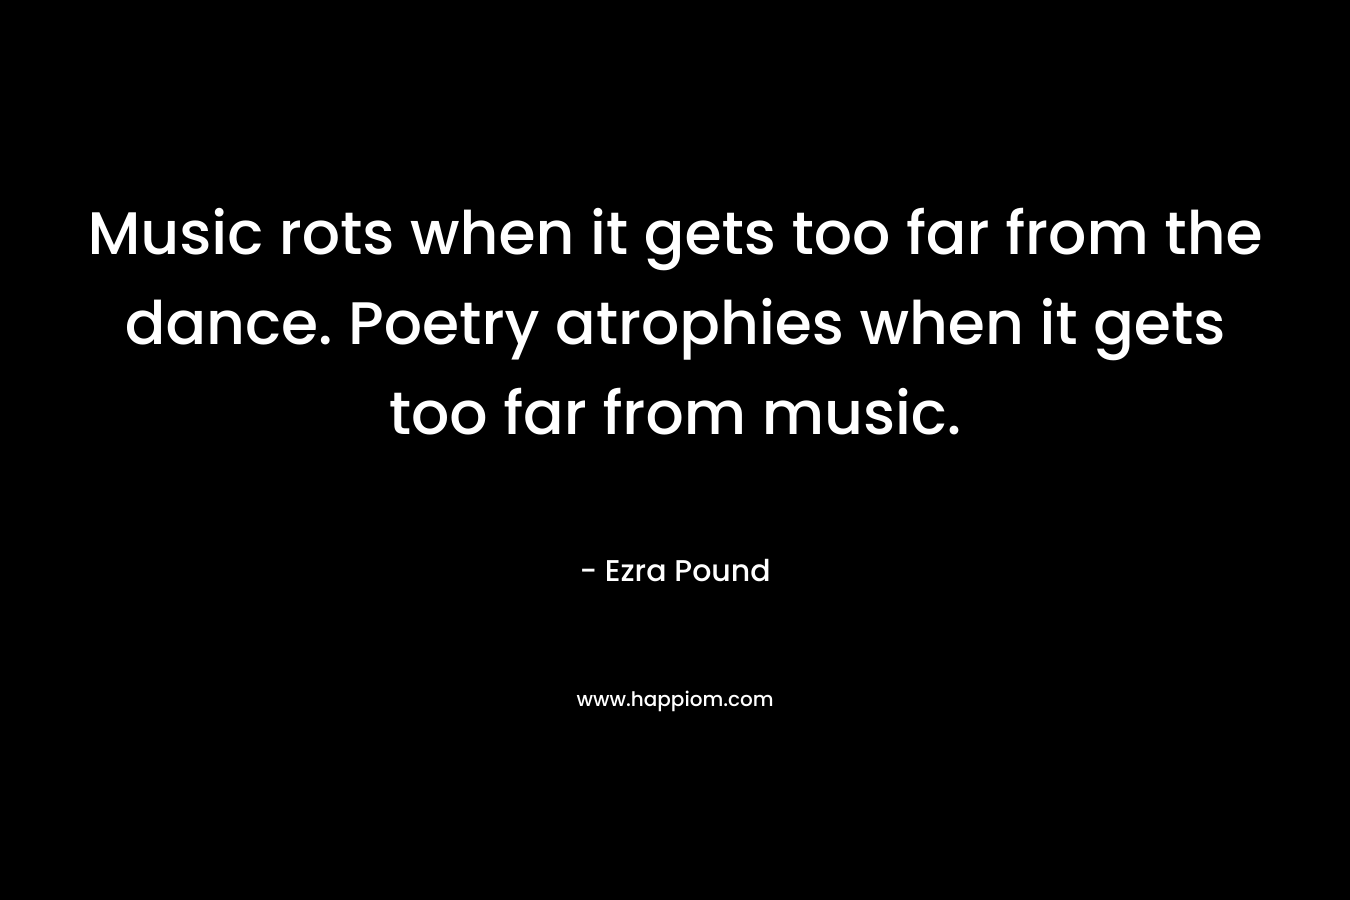 Music rots when it gets too far from the dance. Poetry atrophies when it gets too far from music.